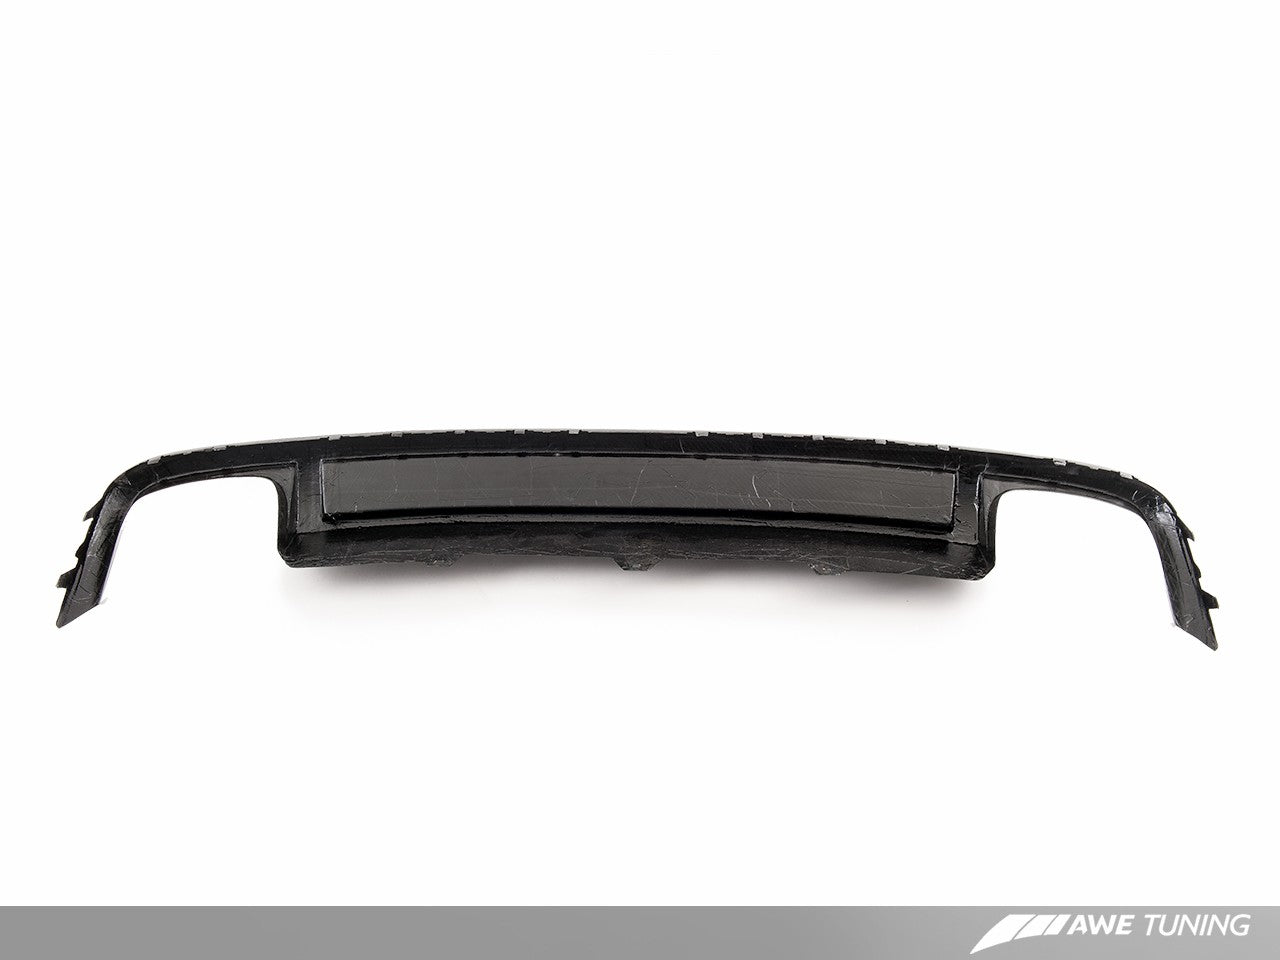 AWE Quad Outlet Bumper Conversion Kit W/ Lower Valance and Trim Strip for B8 A4 2.0T Avant - S-Line Cars